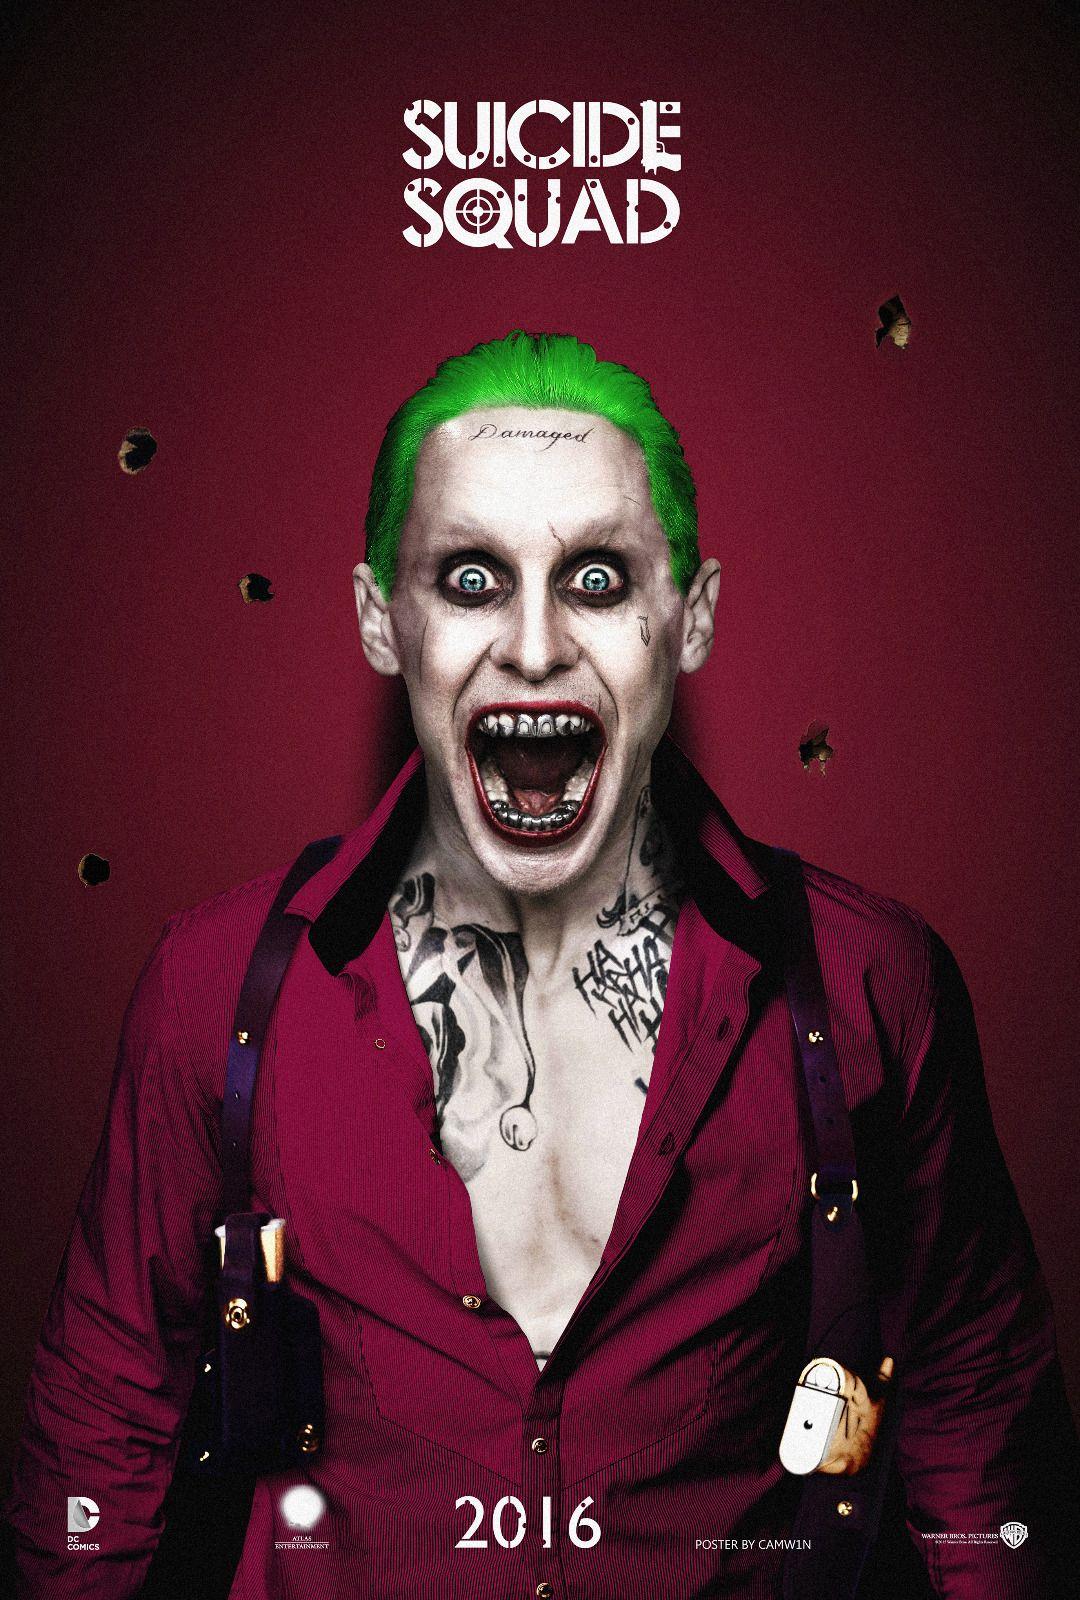 Jared Leto as The Joker- Suicide Squad (2016) by CAMW1N. Suicide